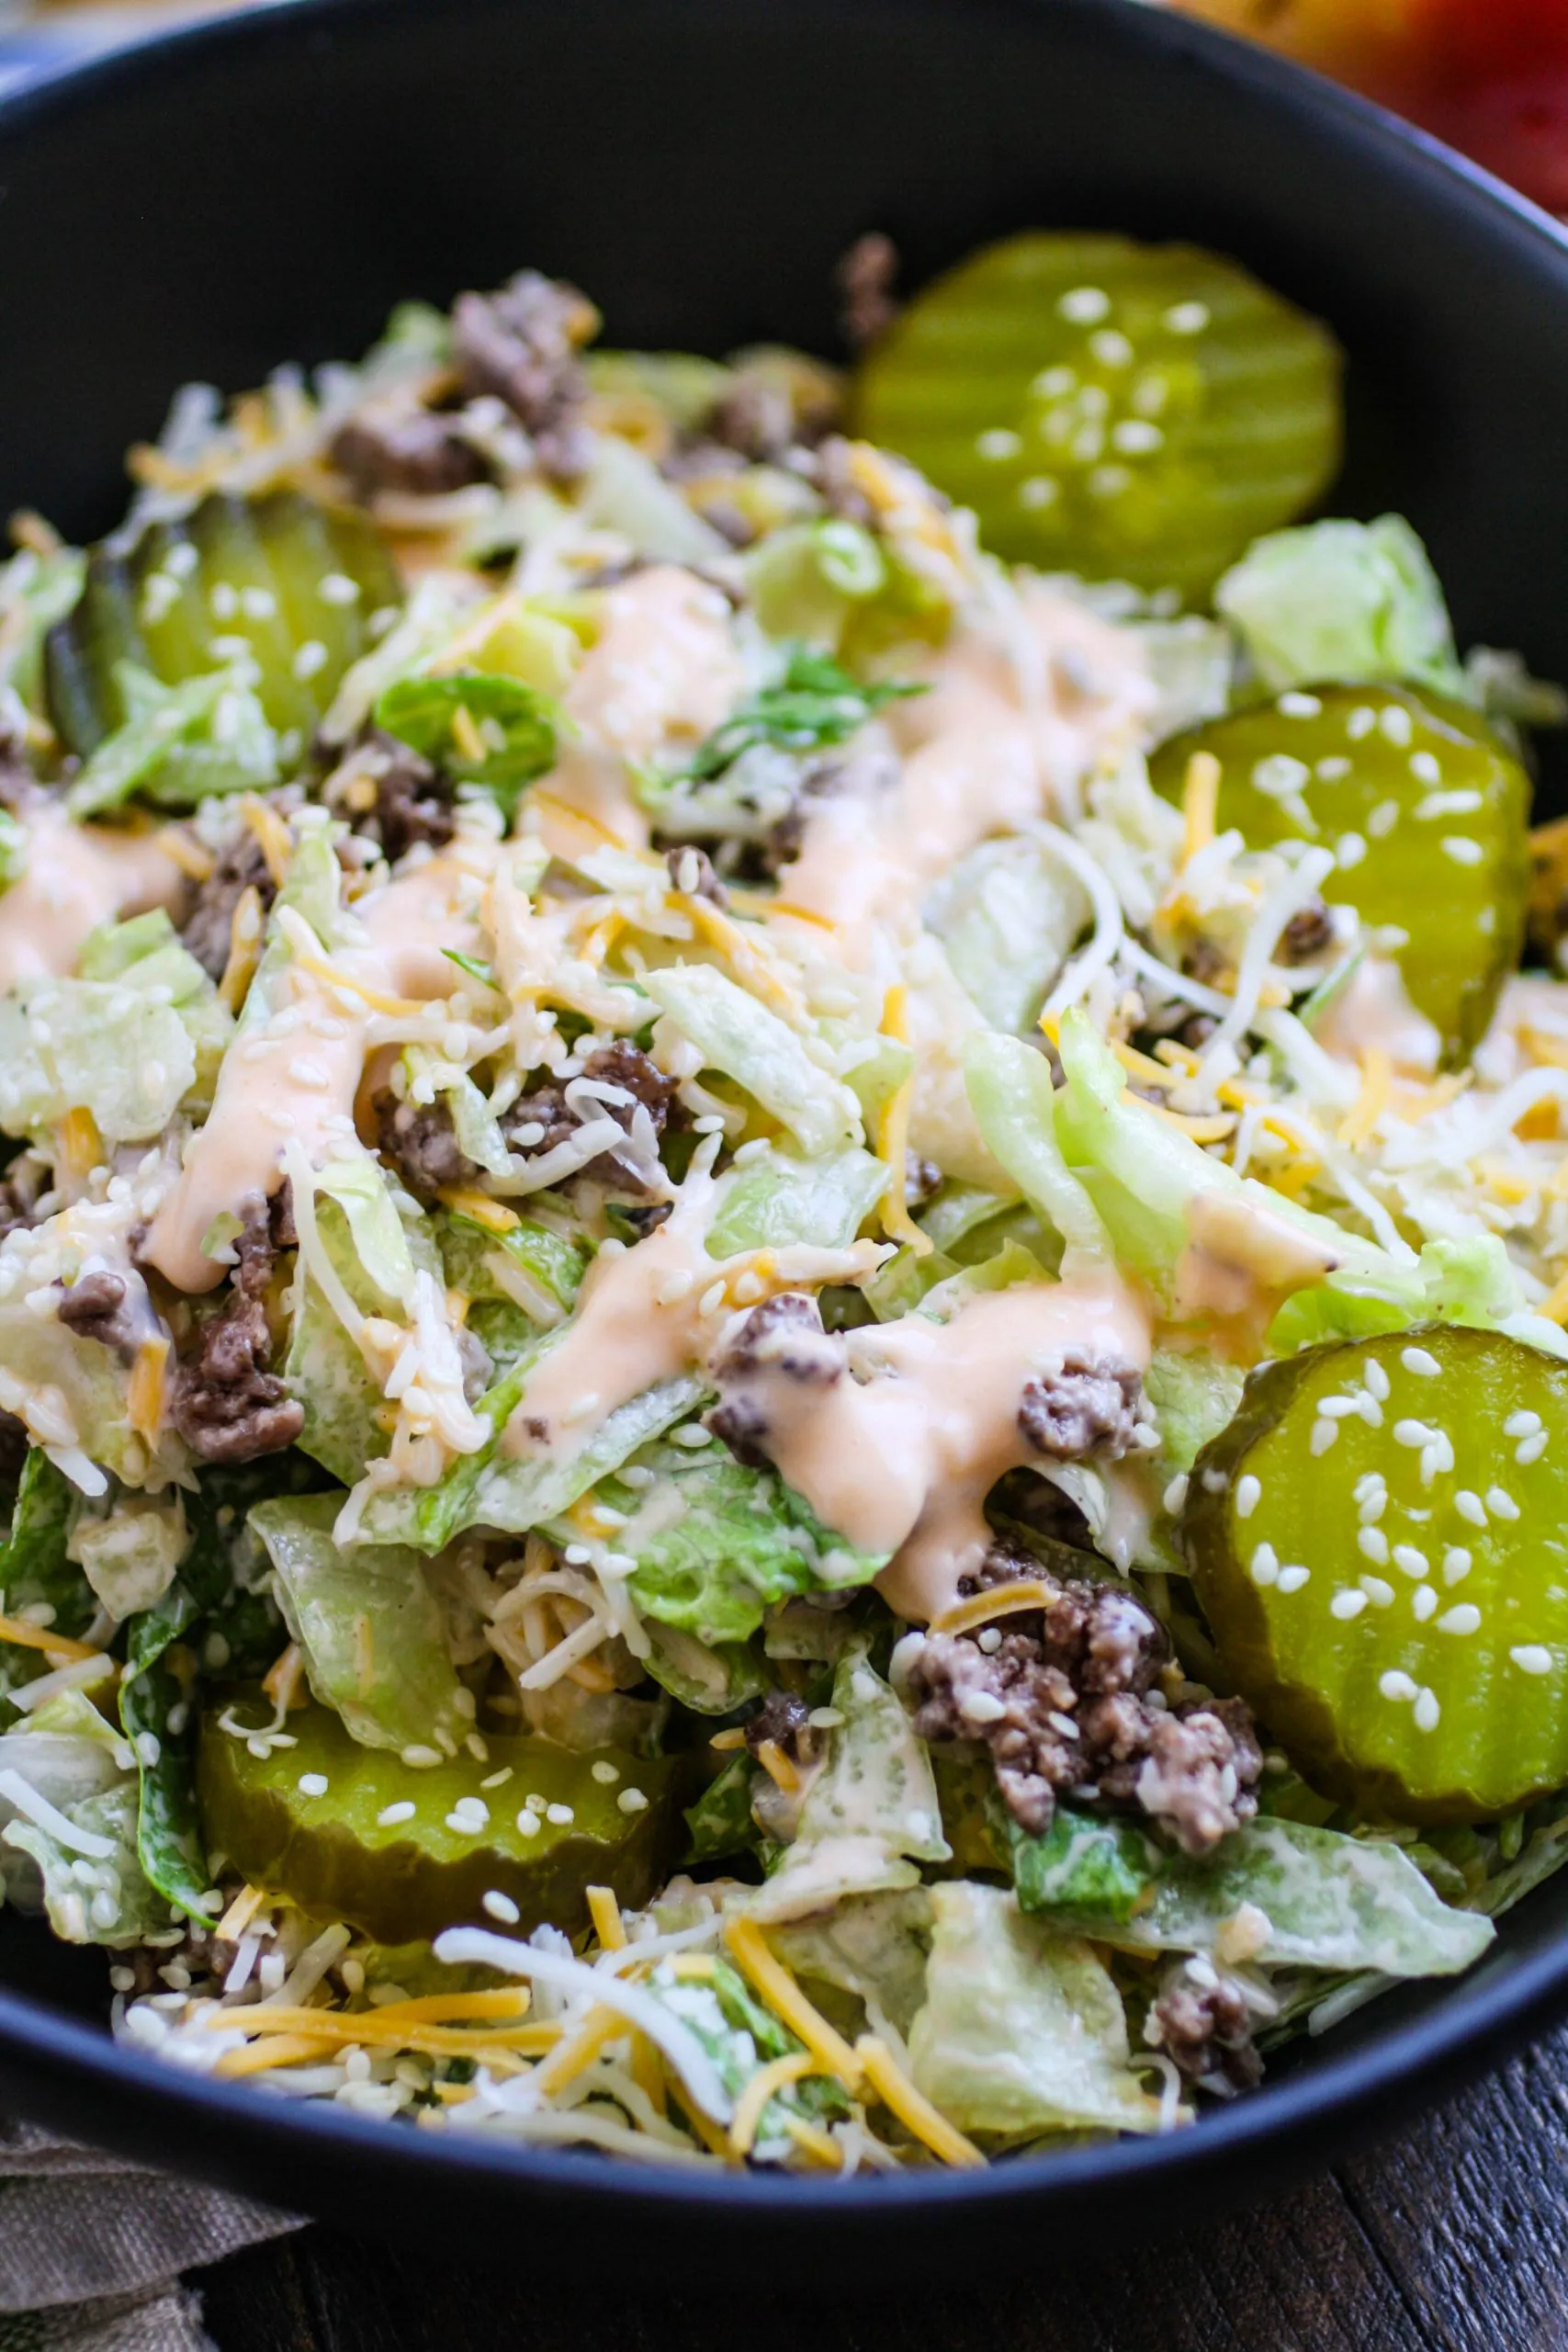 Easy “Big Mac” Salad will satisfy your cravings with great flavor!